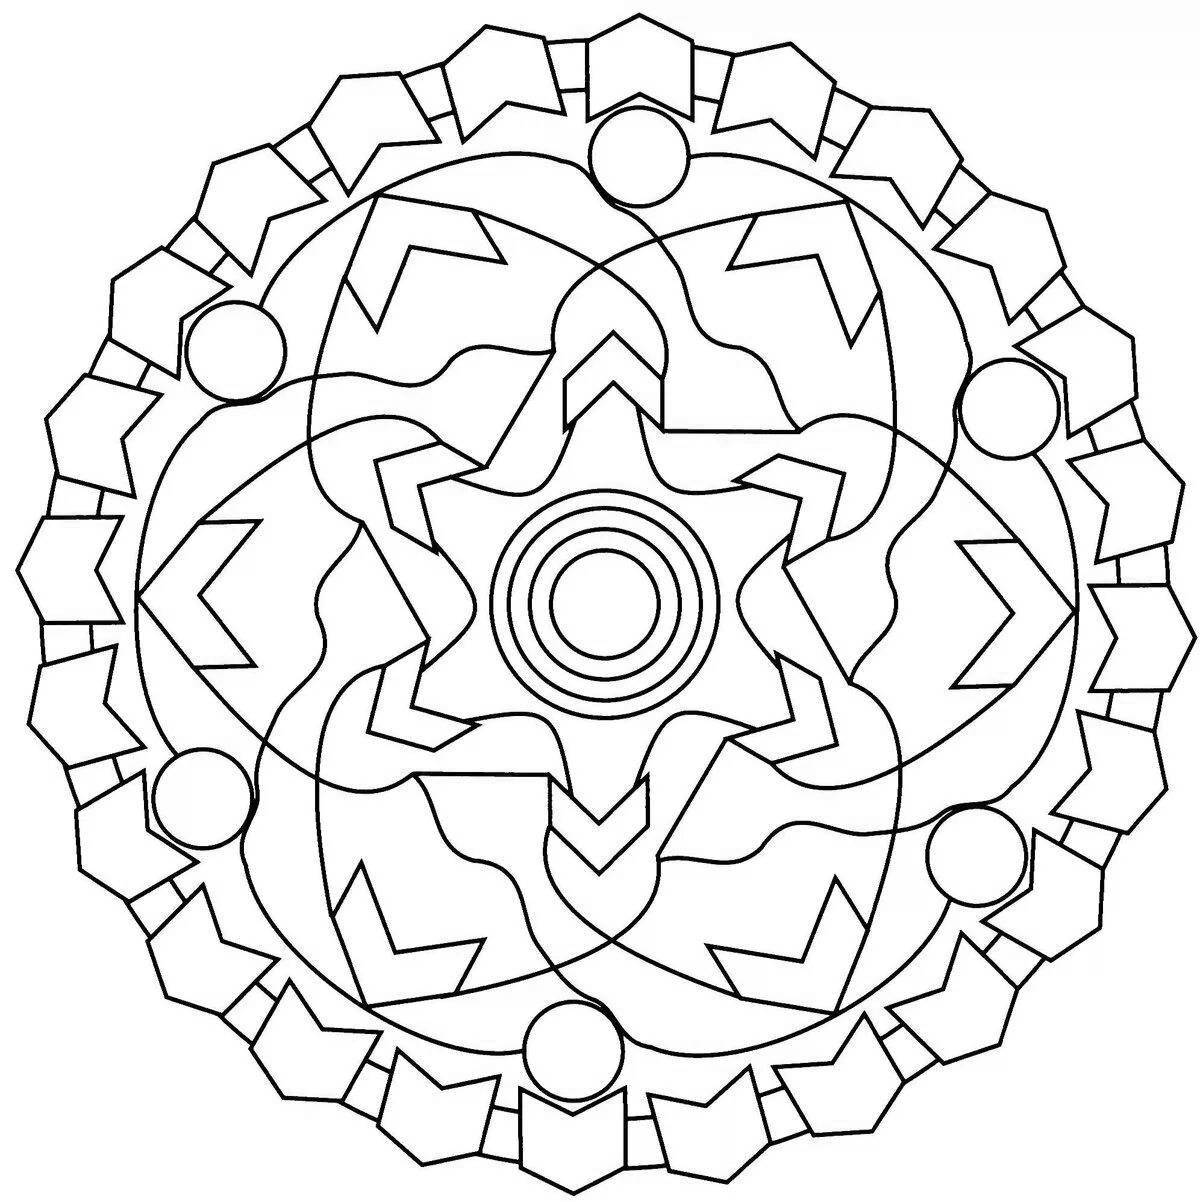 Great coloring mandala for luck and achievement